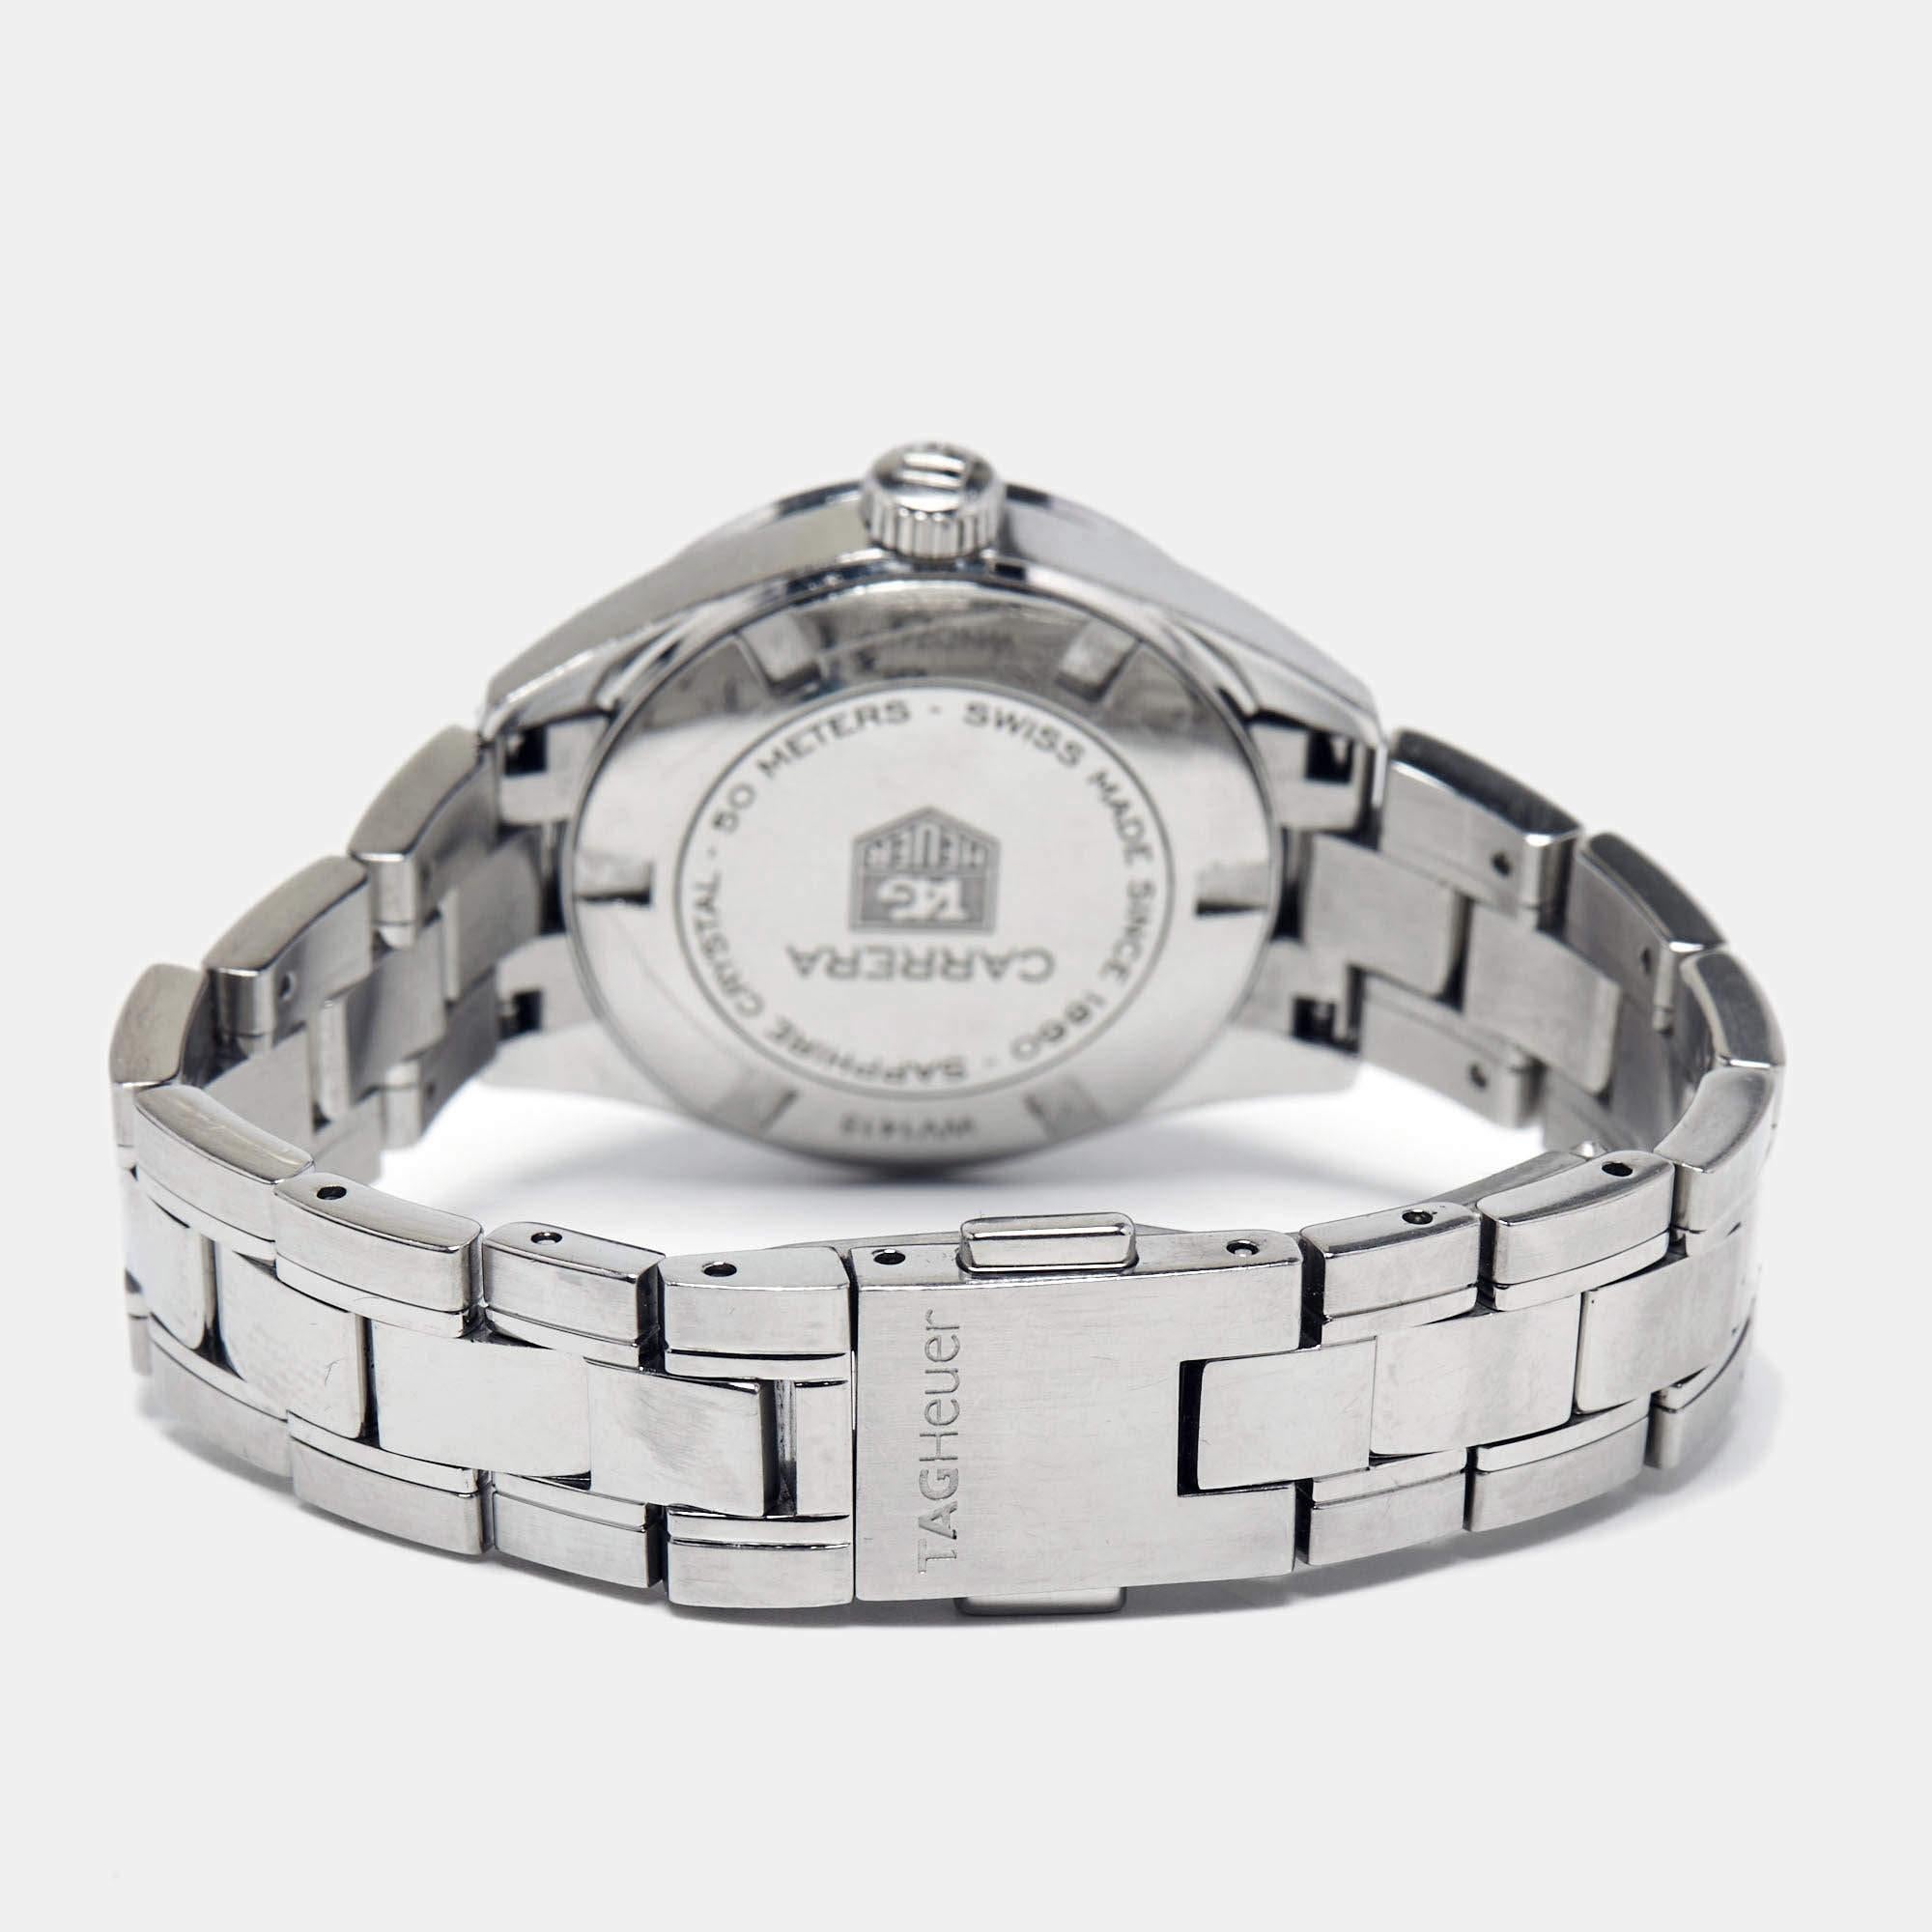 This exquisite watch by Tag Heuer is an epic timepiece for the modern woman. It has a set of linked stainless-steel straps with a strategically weighted case made of stainless steel.

